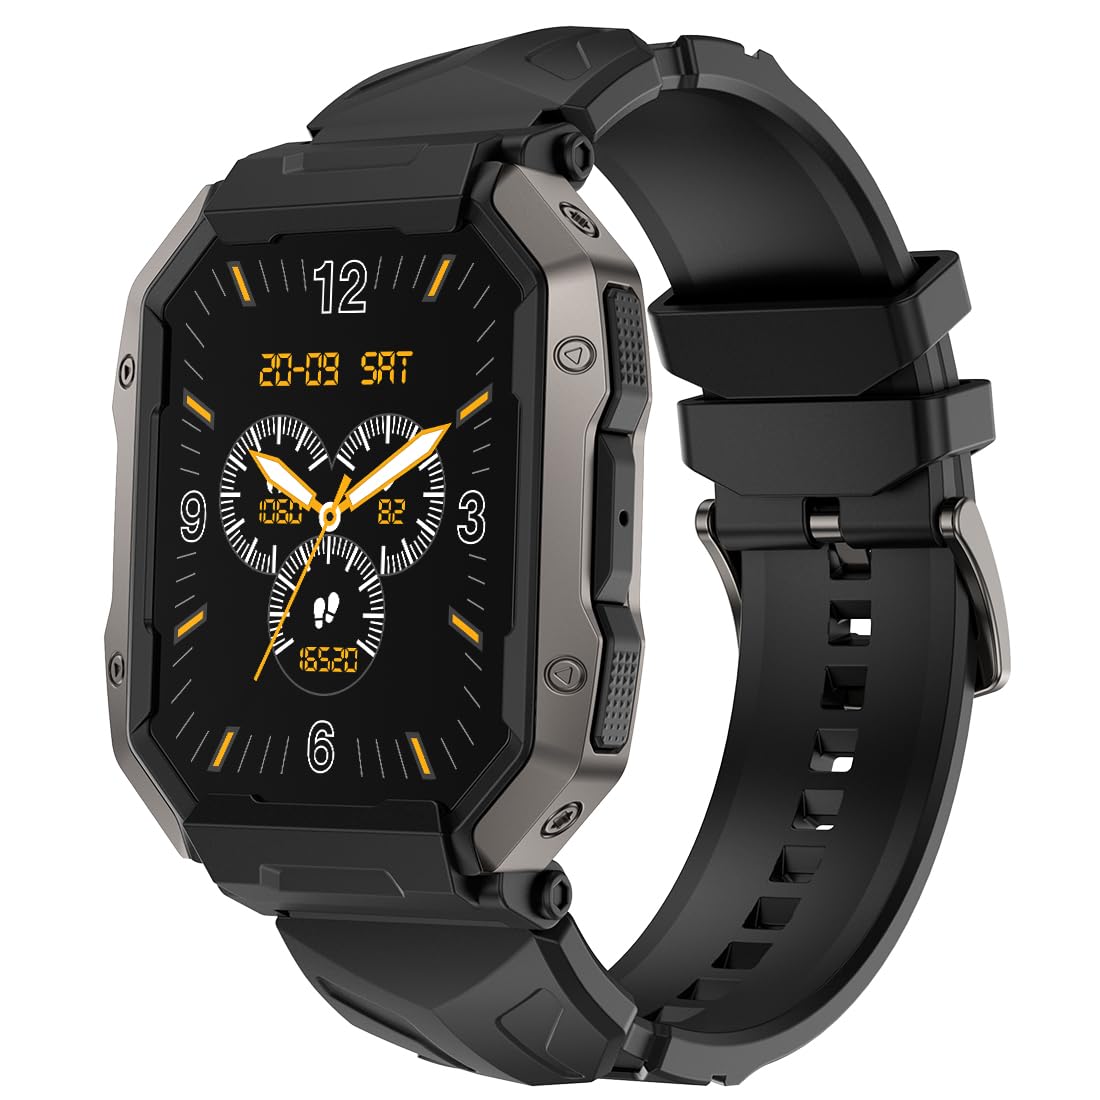 Fire-Boltt Cobra Smart Watch 1.78" Always-On AMOLED Display, Army Grade Strong Build, Bluetooth Calling with 123 Sports Modes, 60 Hz Refresh Rate, IP68 Rating